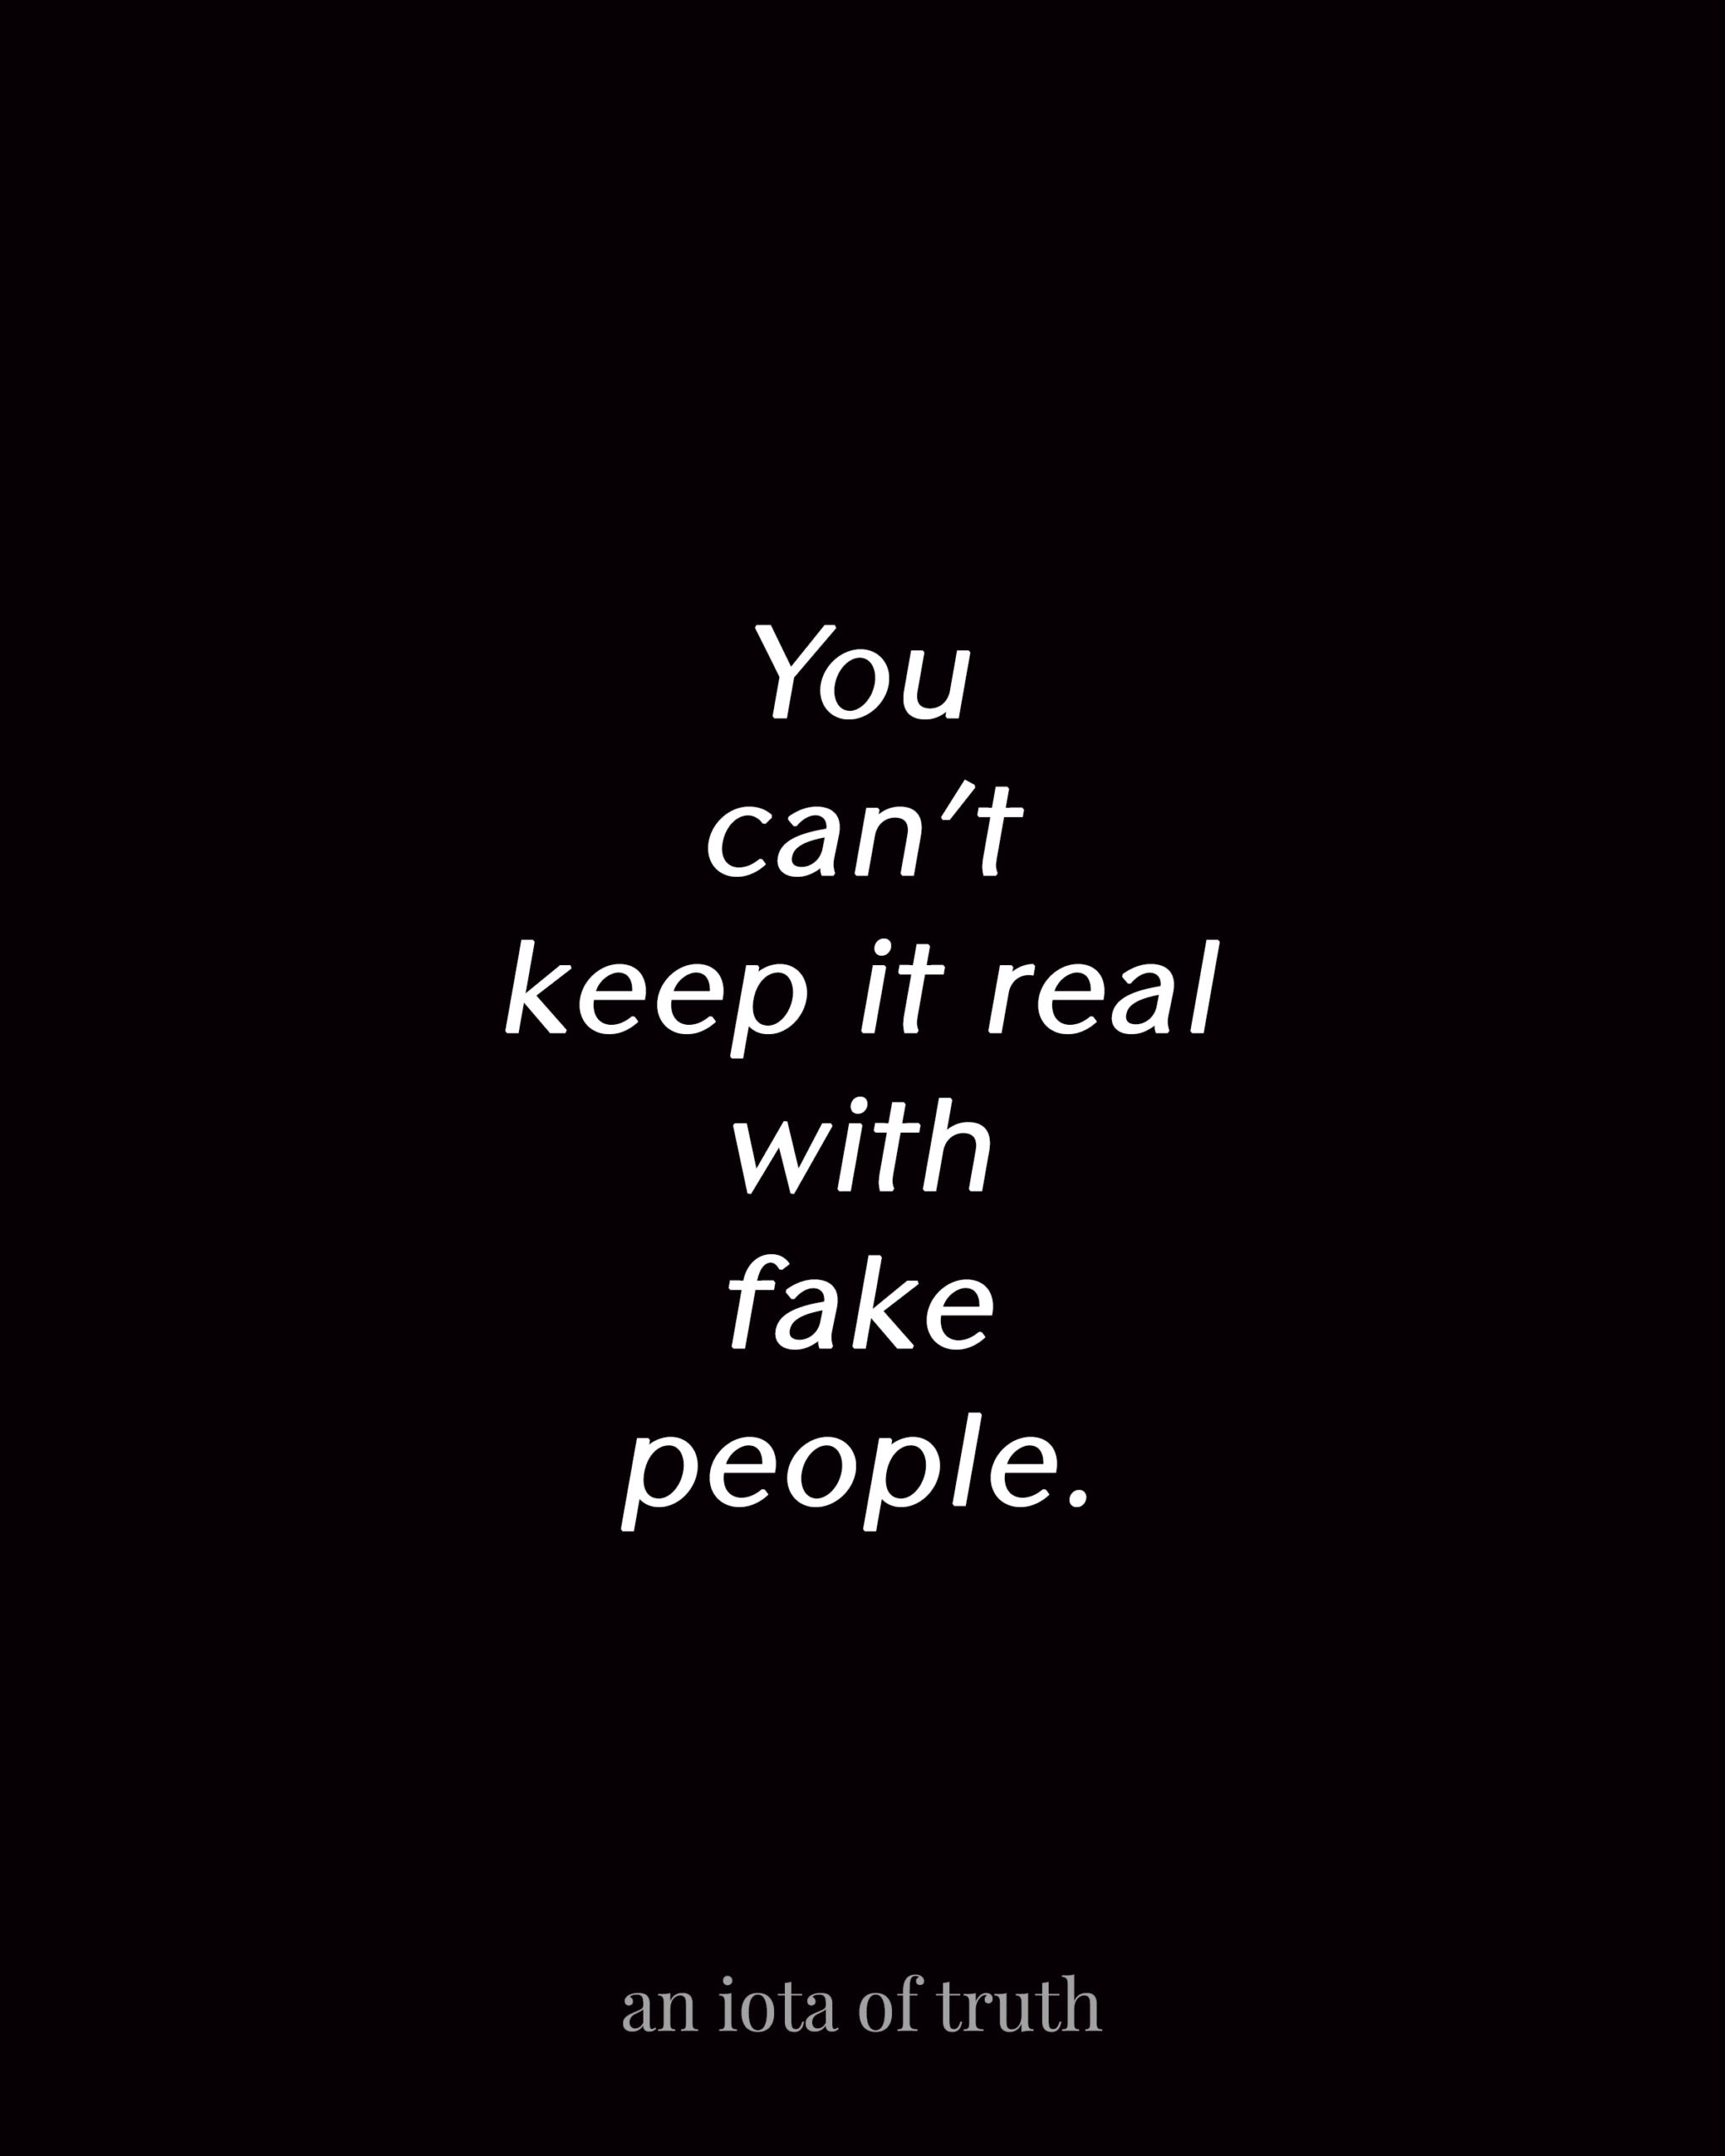 You can't keep it real with fake people.